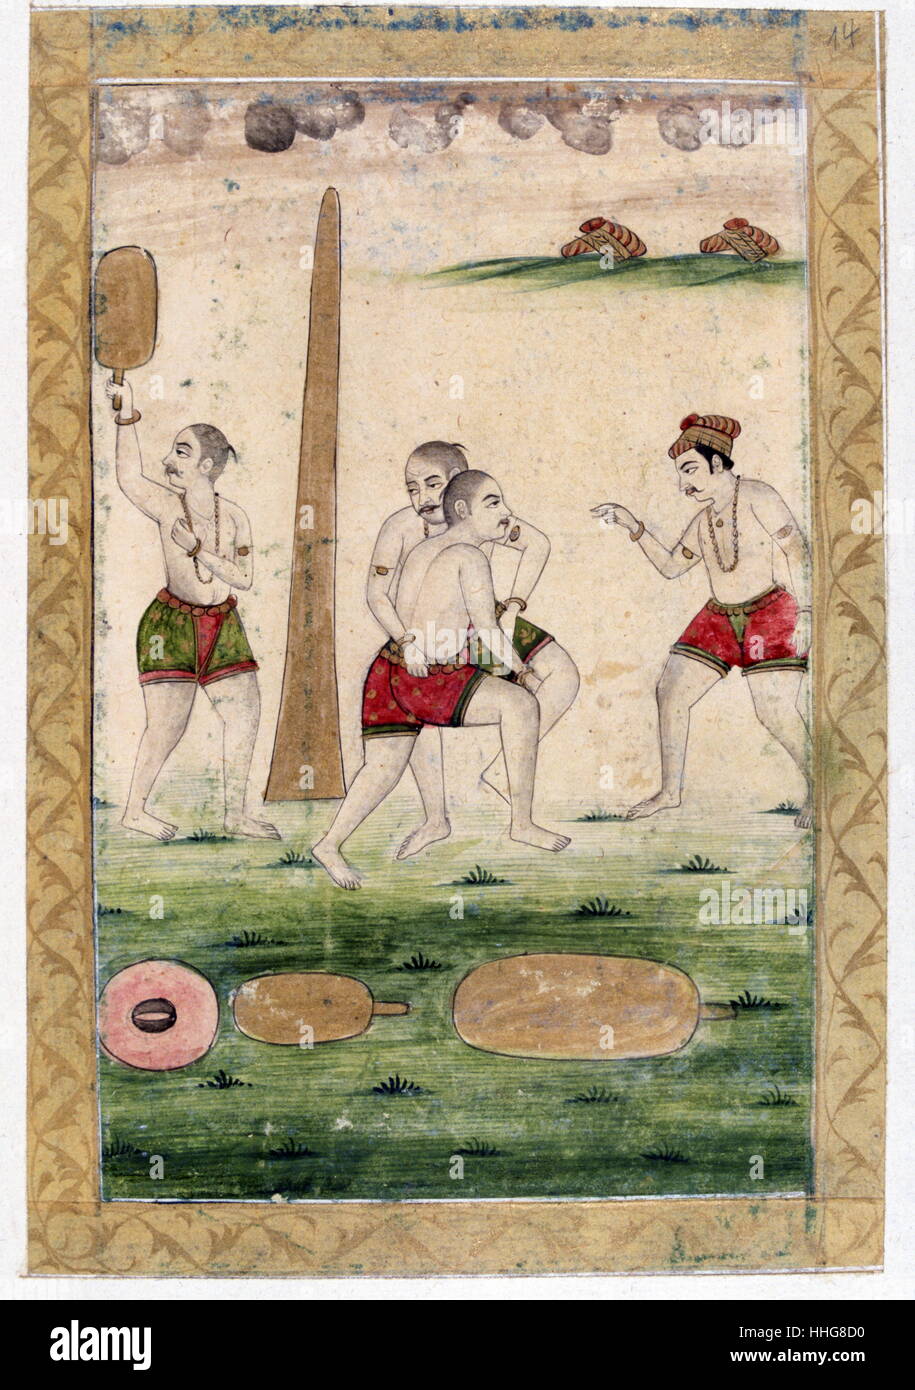 Indian Mughal miniature depicting soldiers in training (fighting). Rajasthan school; Album of Ragamala 19th century Stock Photo